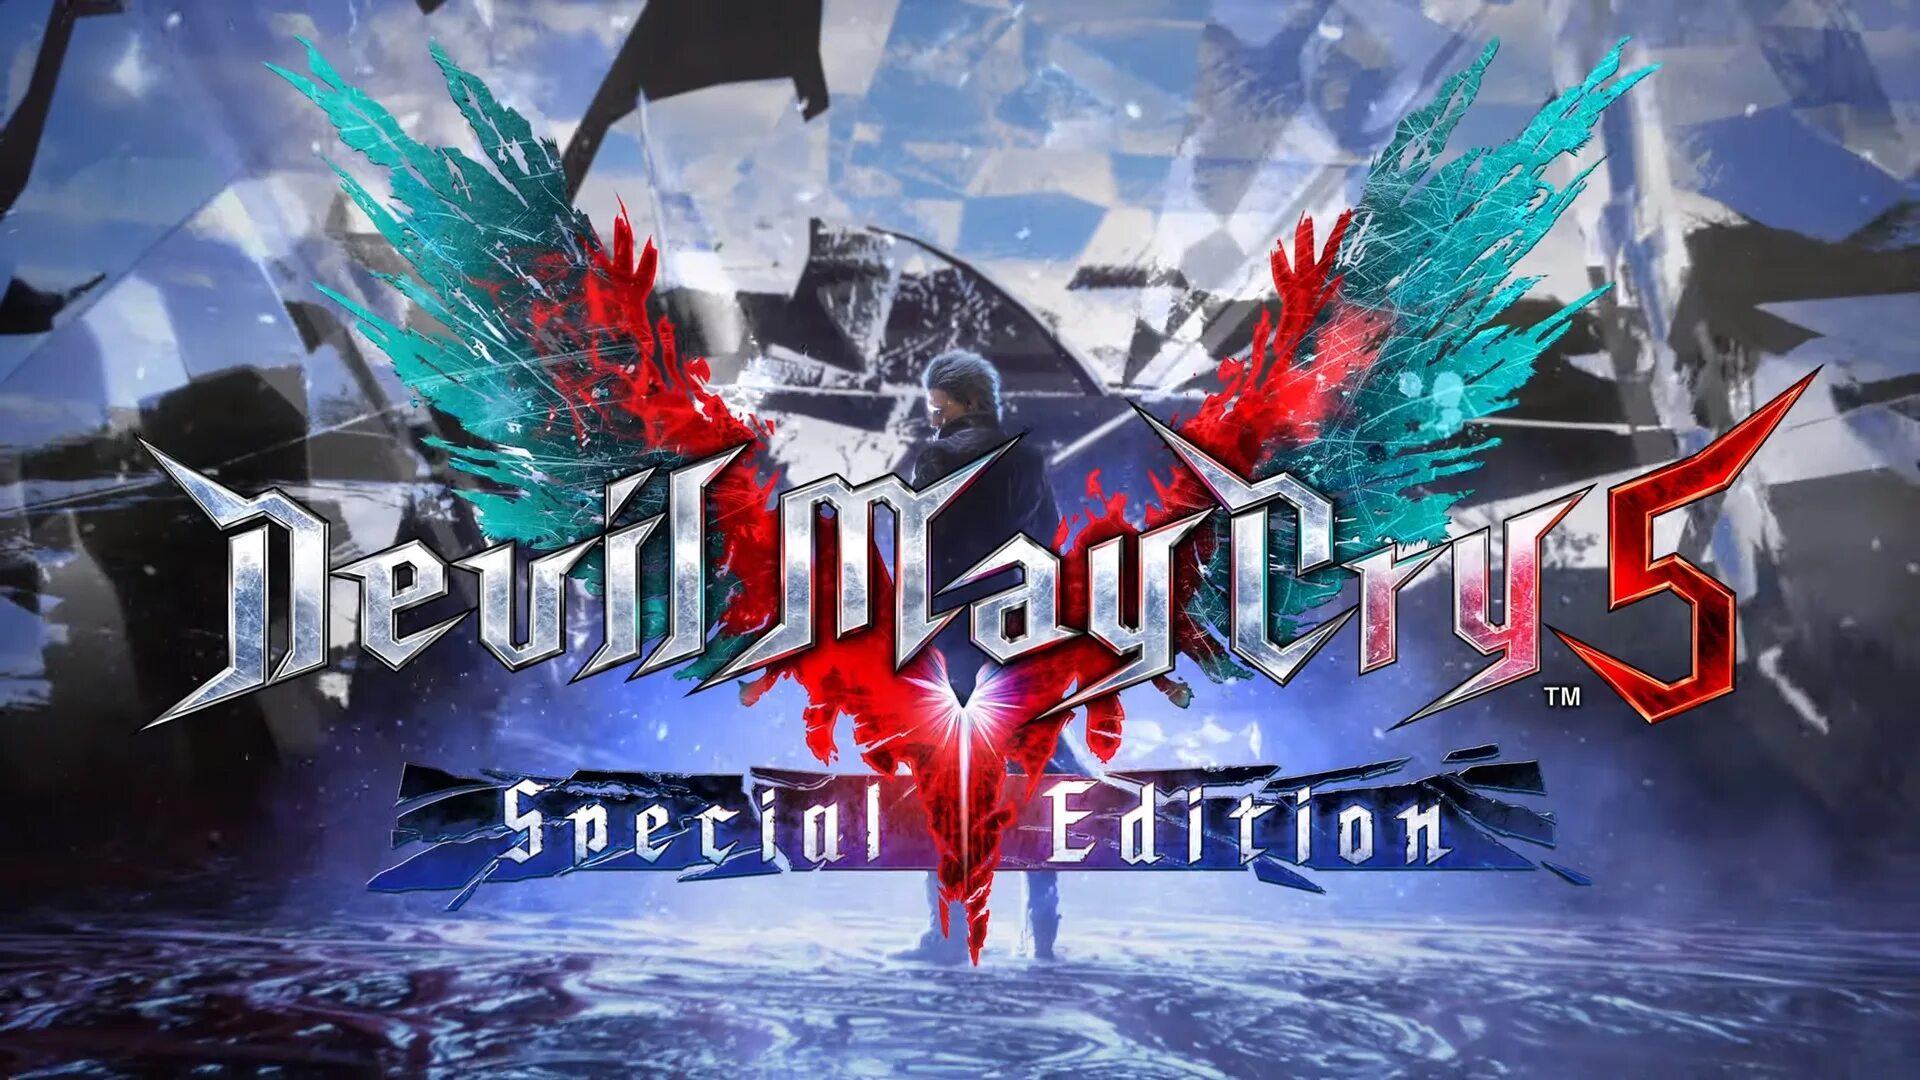 Dmc se. Devil May Cry 5 Special Edition. Devil May Cry 5 Special Edition ps5. Devil May Cry 5 Special Edition Xbox. Devil May Cry 5 Deluxe Edition.